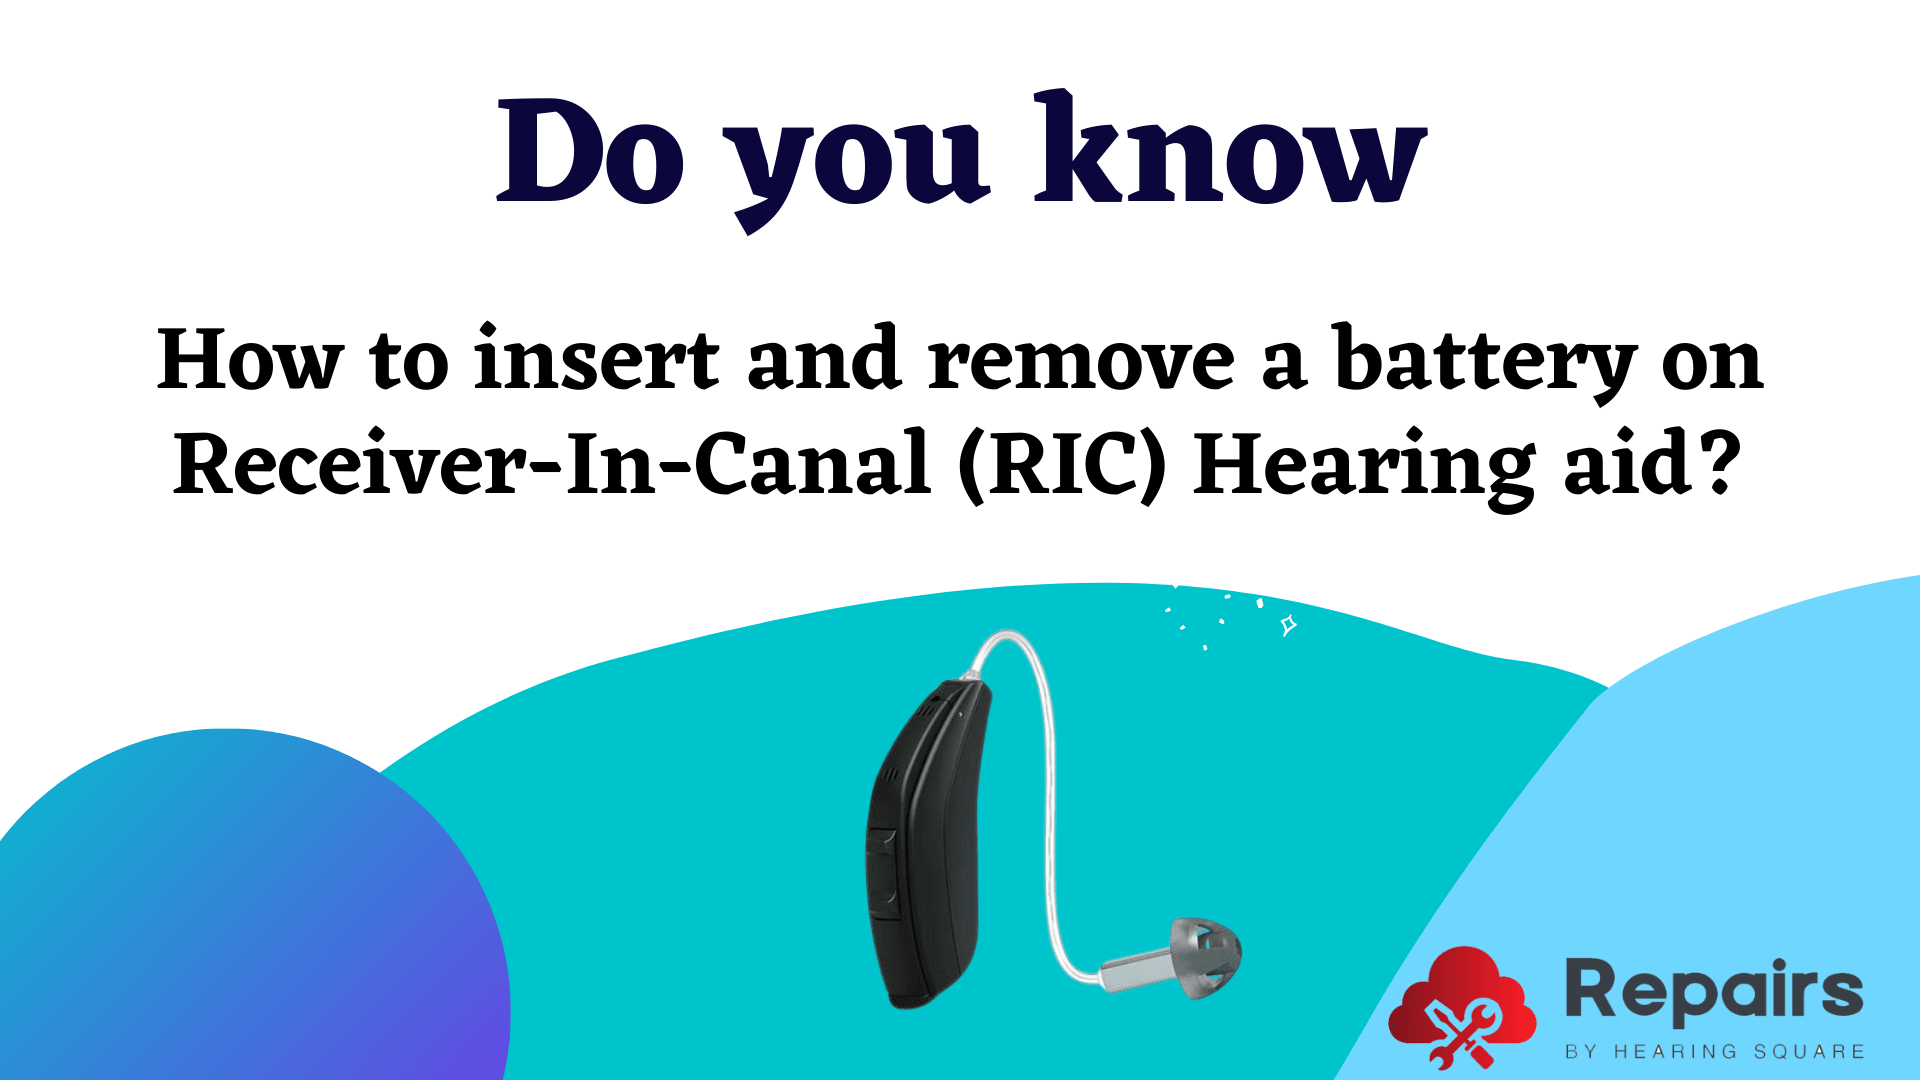 How to insert and remove a battery on Receiver-In-Canal (RIC) Hearing aid